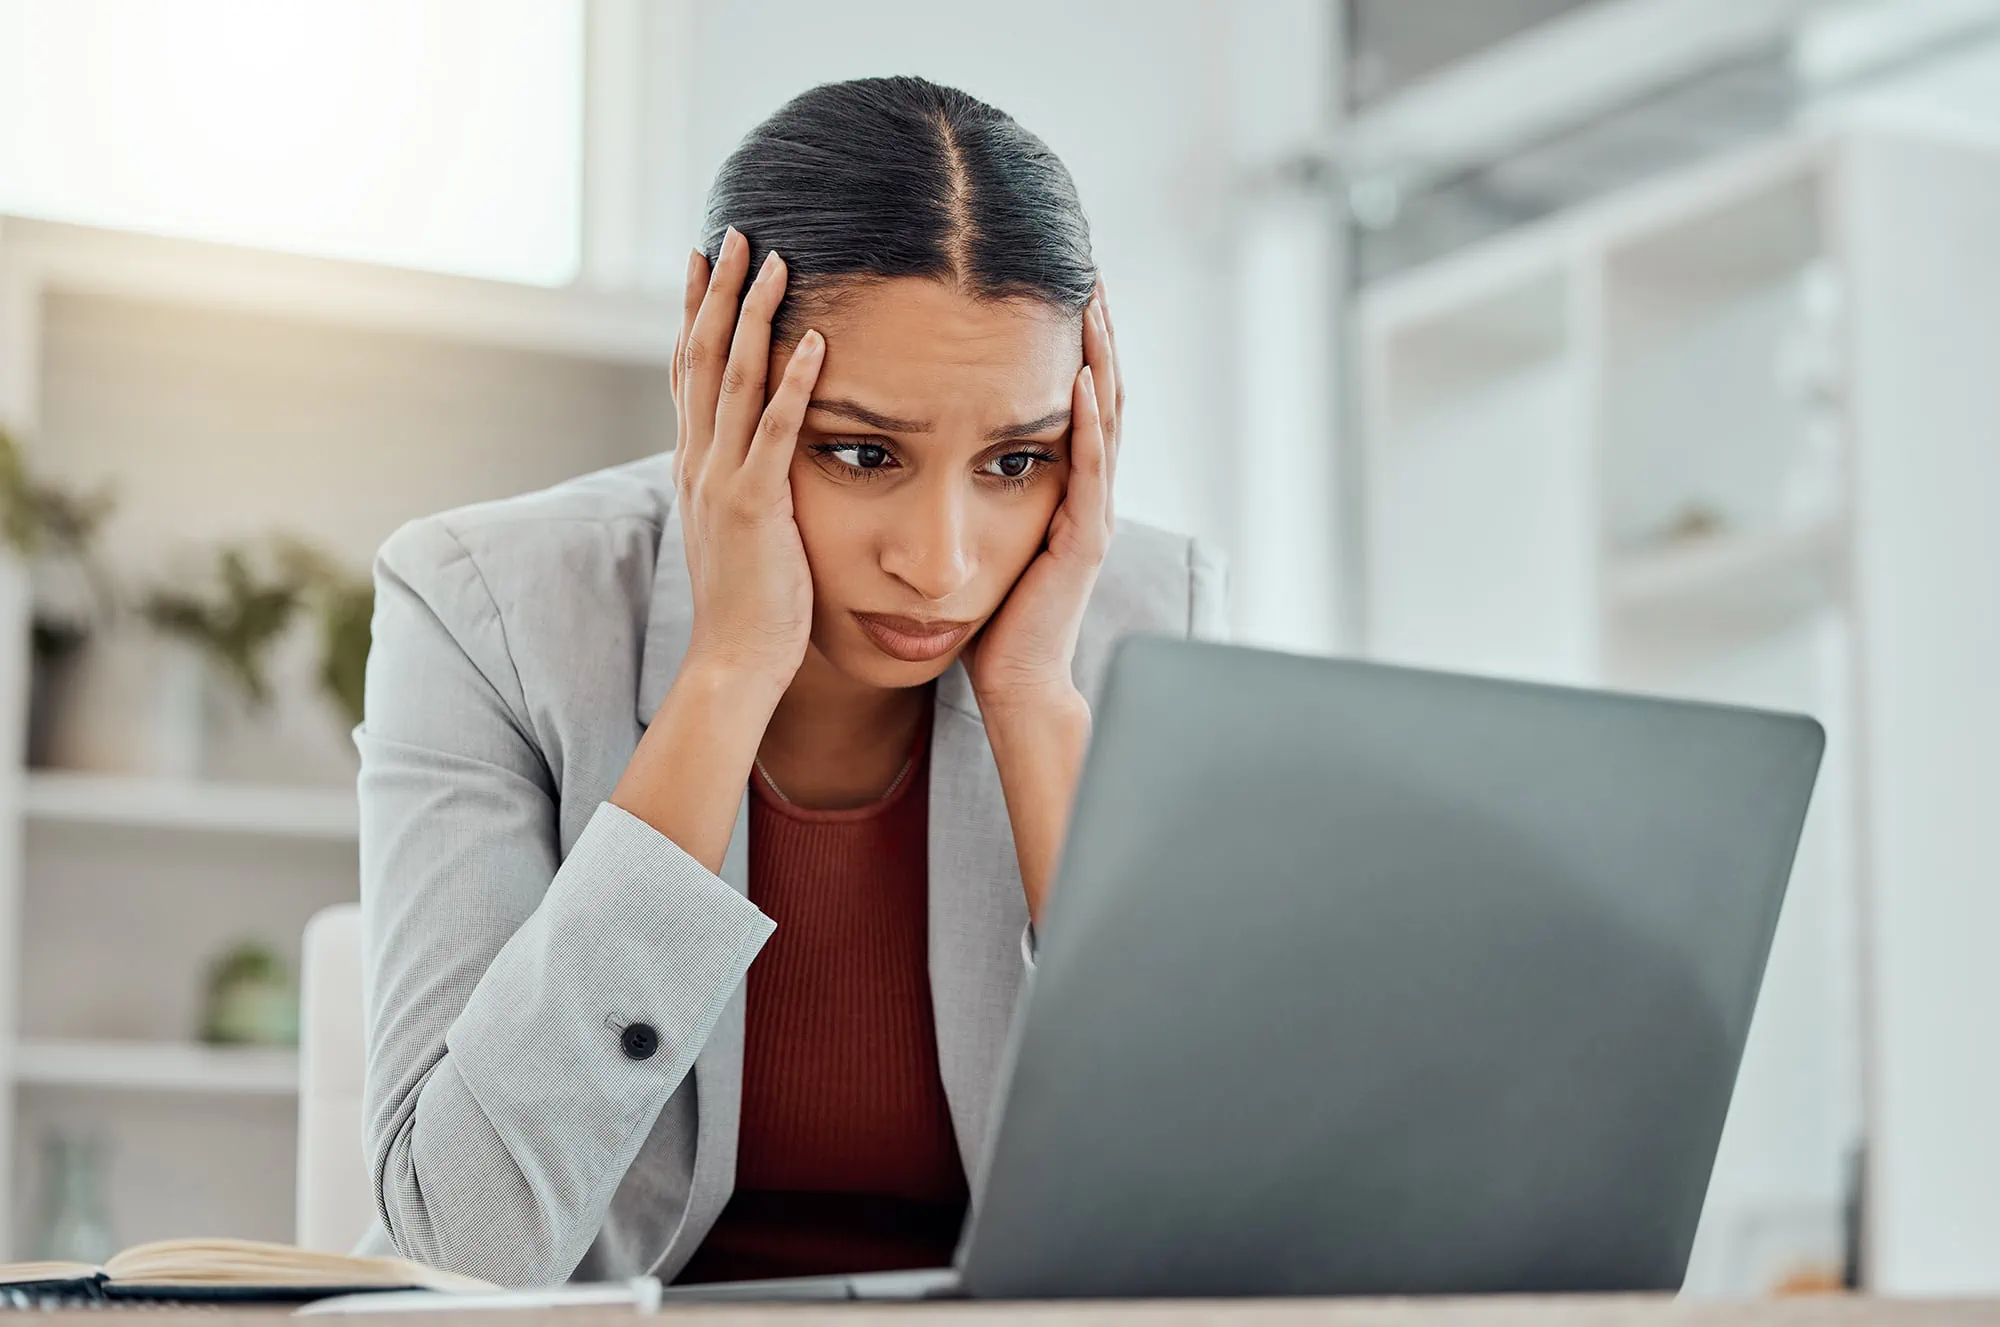 Pain, headache and stressed finance manager feeling sick, tired and worried about a financial problem at her startup company. Young and frustrated professional businesswoman working at an office